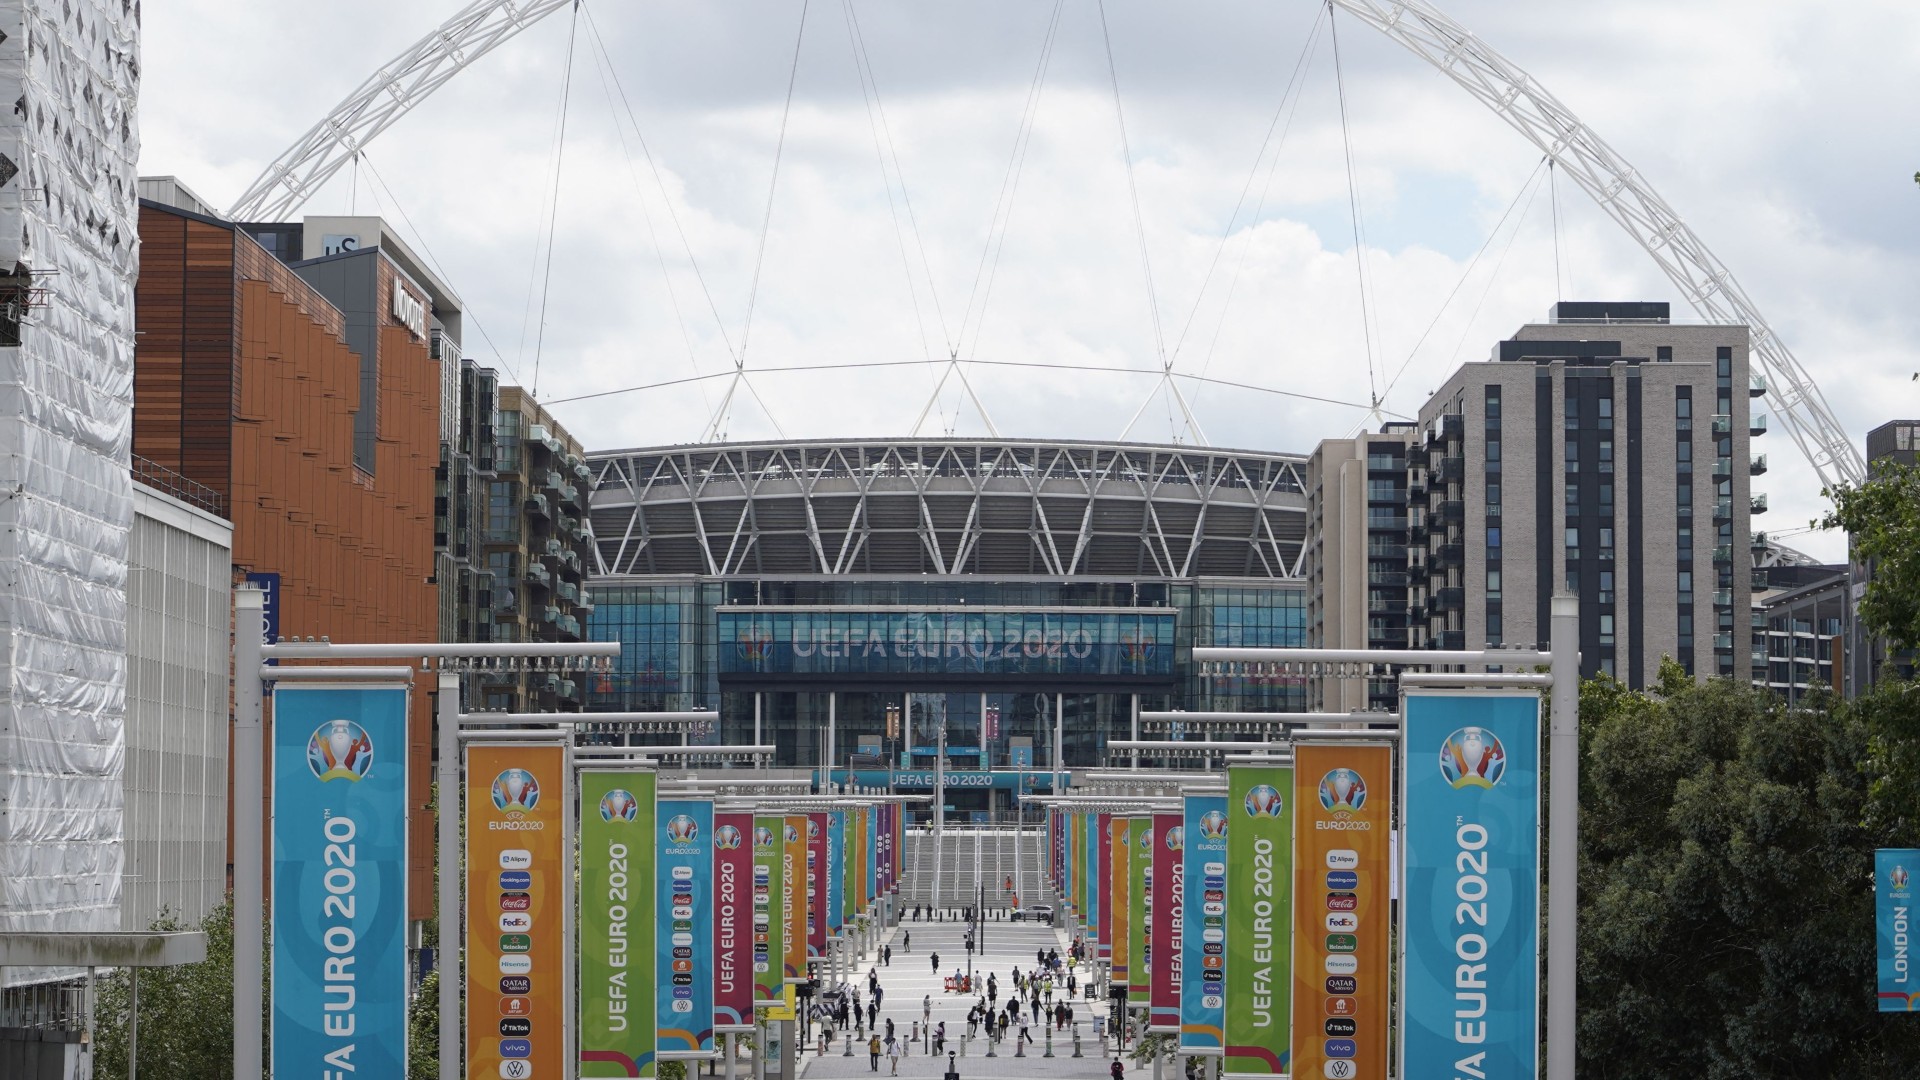 AEW: All In London at Wembley Stadium